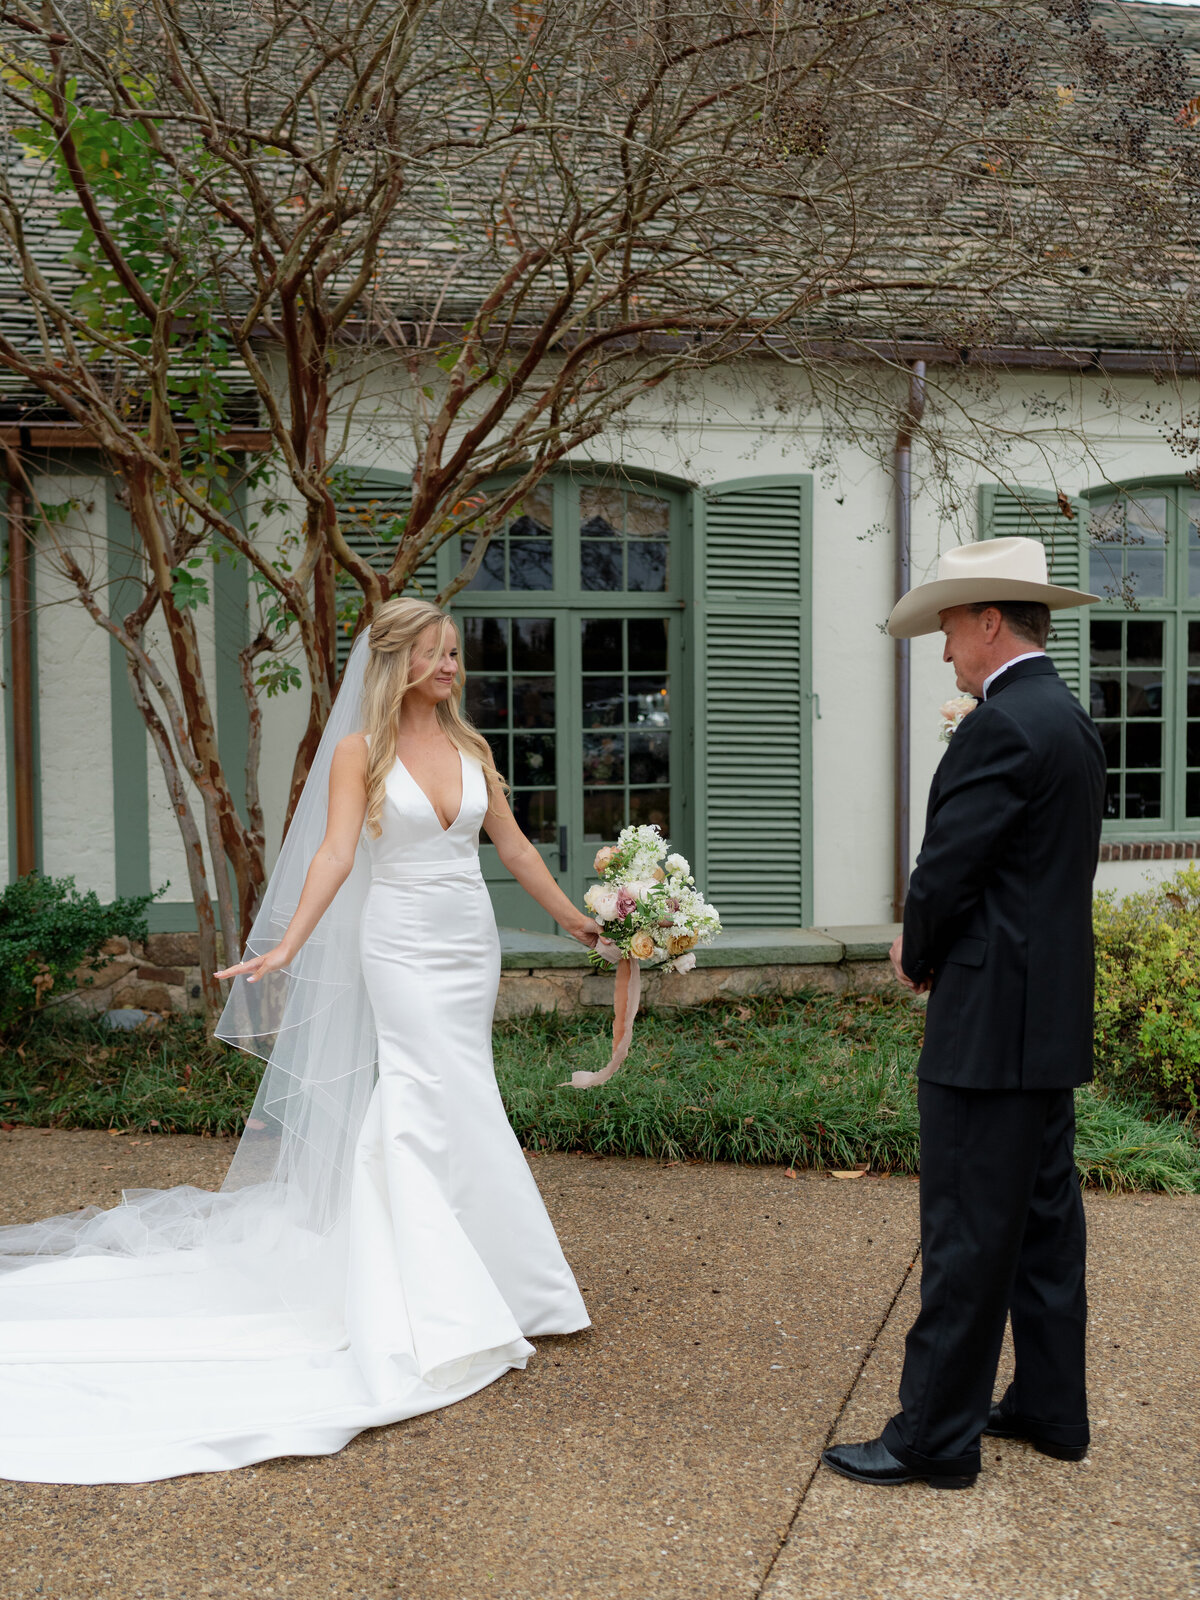 Whitney Bowman Events Knoxville Tennessee Wedding Planner Planning Destination Southern Weddings Florida 30A Alabama Luxury Event Destination Weddings MaggieSpencerWedding_Knoxville_2022_@benfinch_FinchPhoto-172